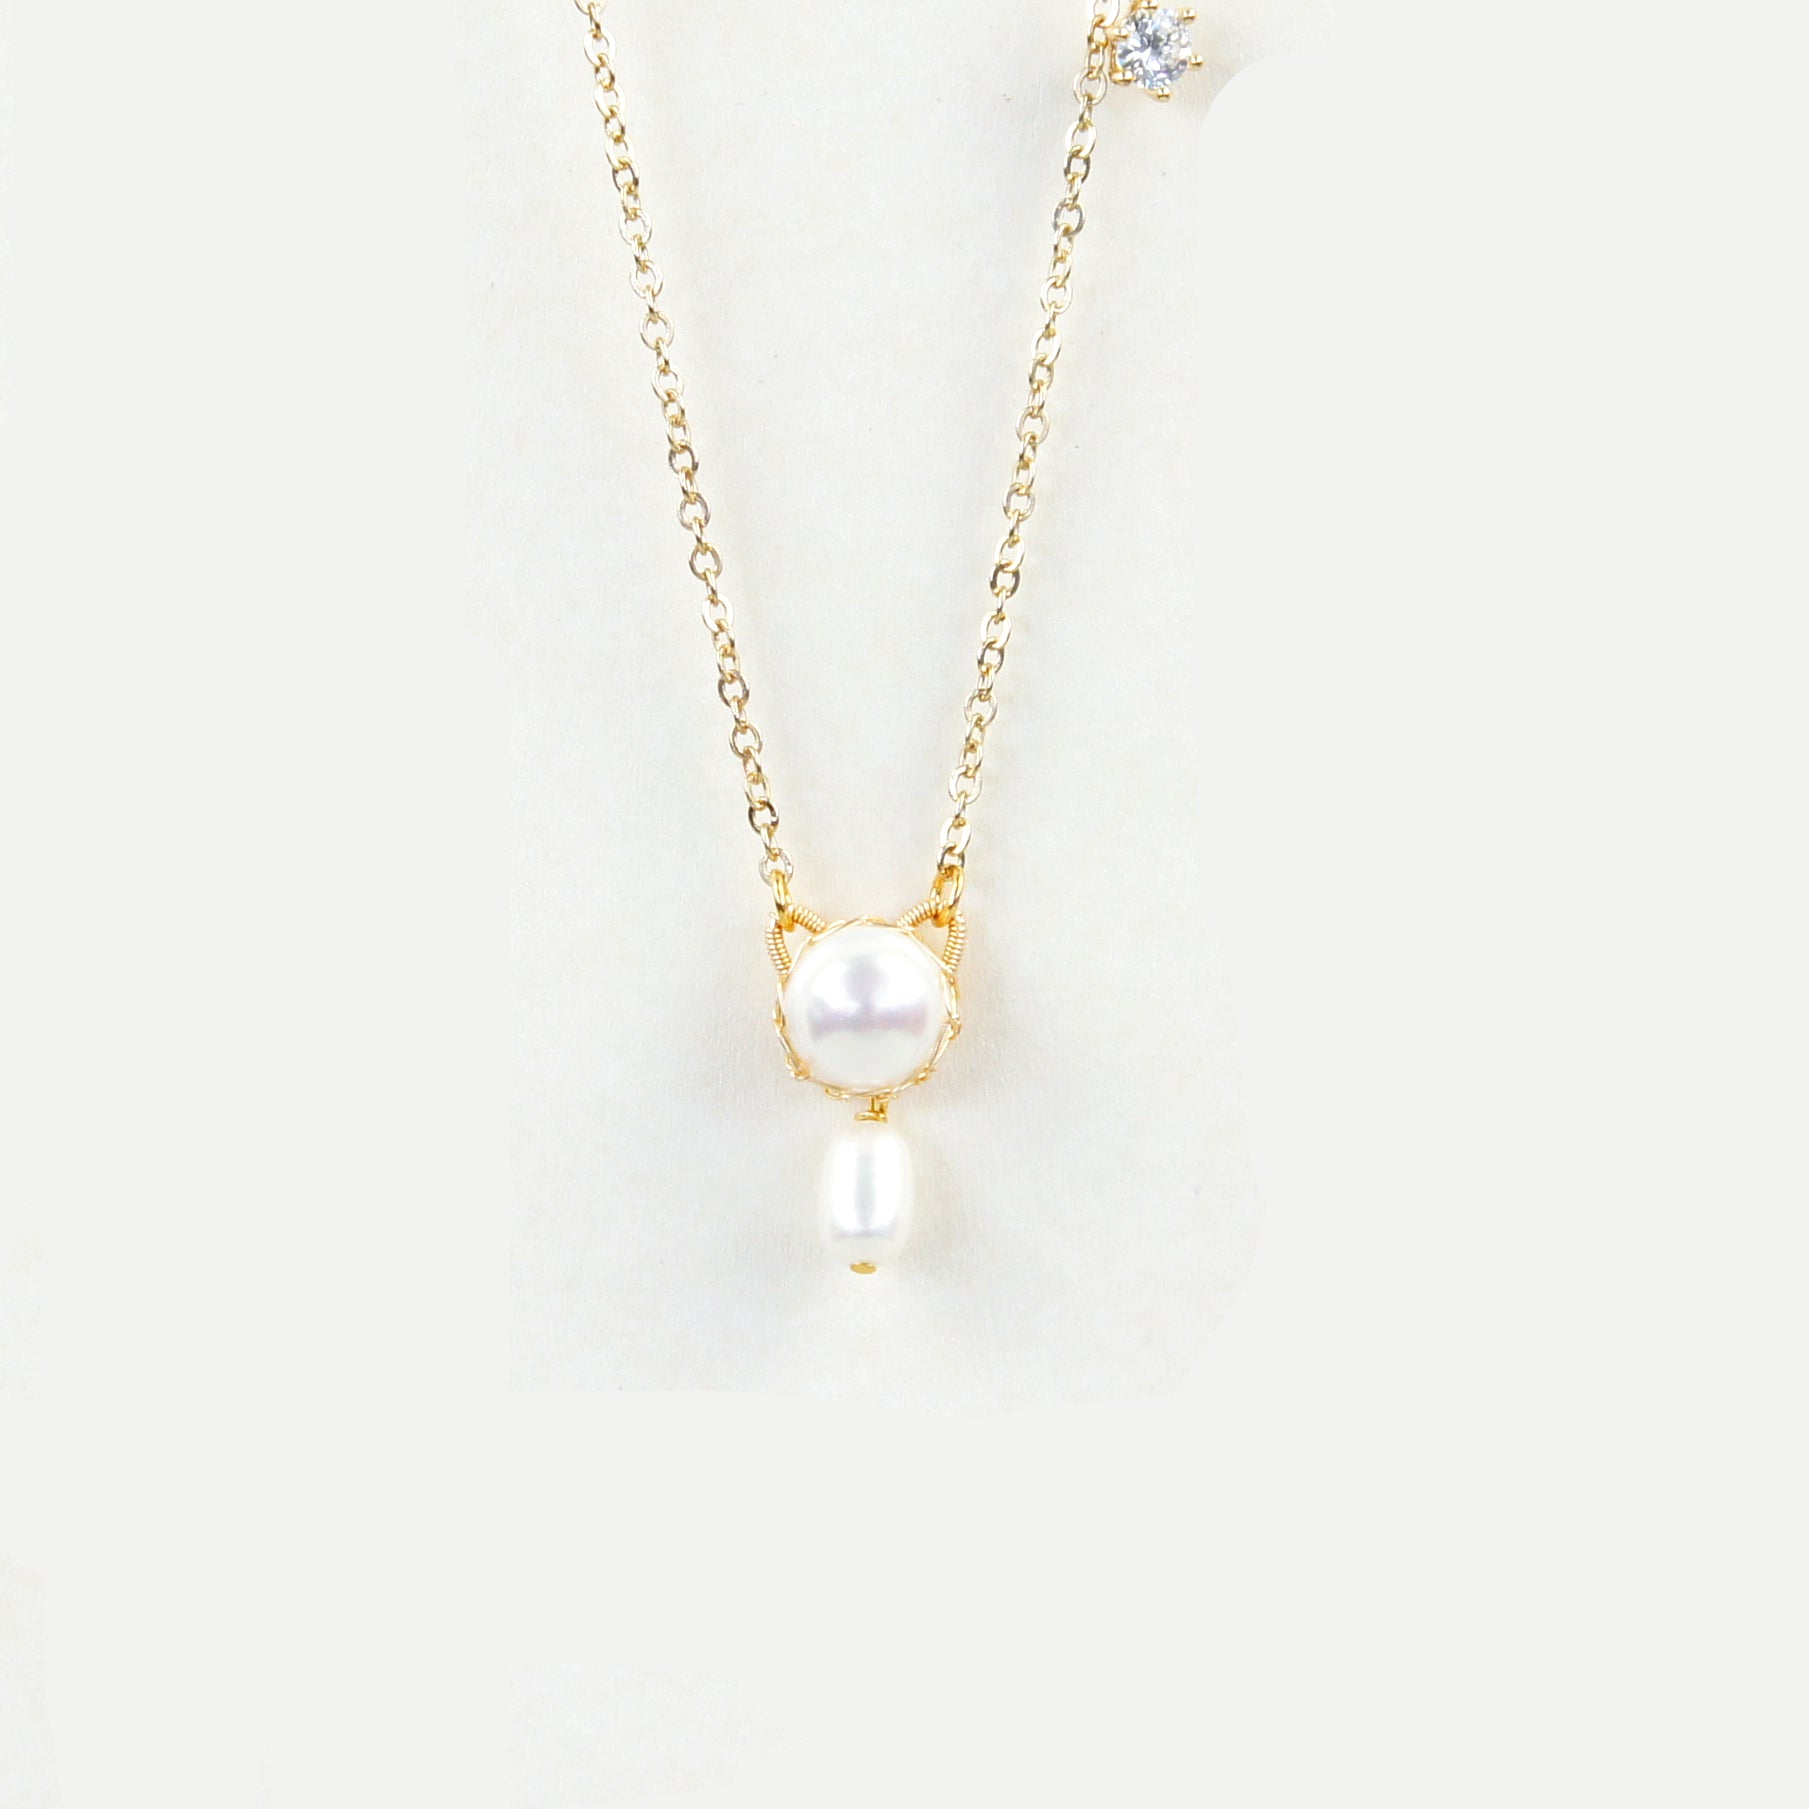 You're Purrfect 10mm Freshwater Pearl Cat Necklace